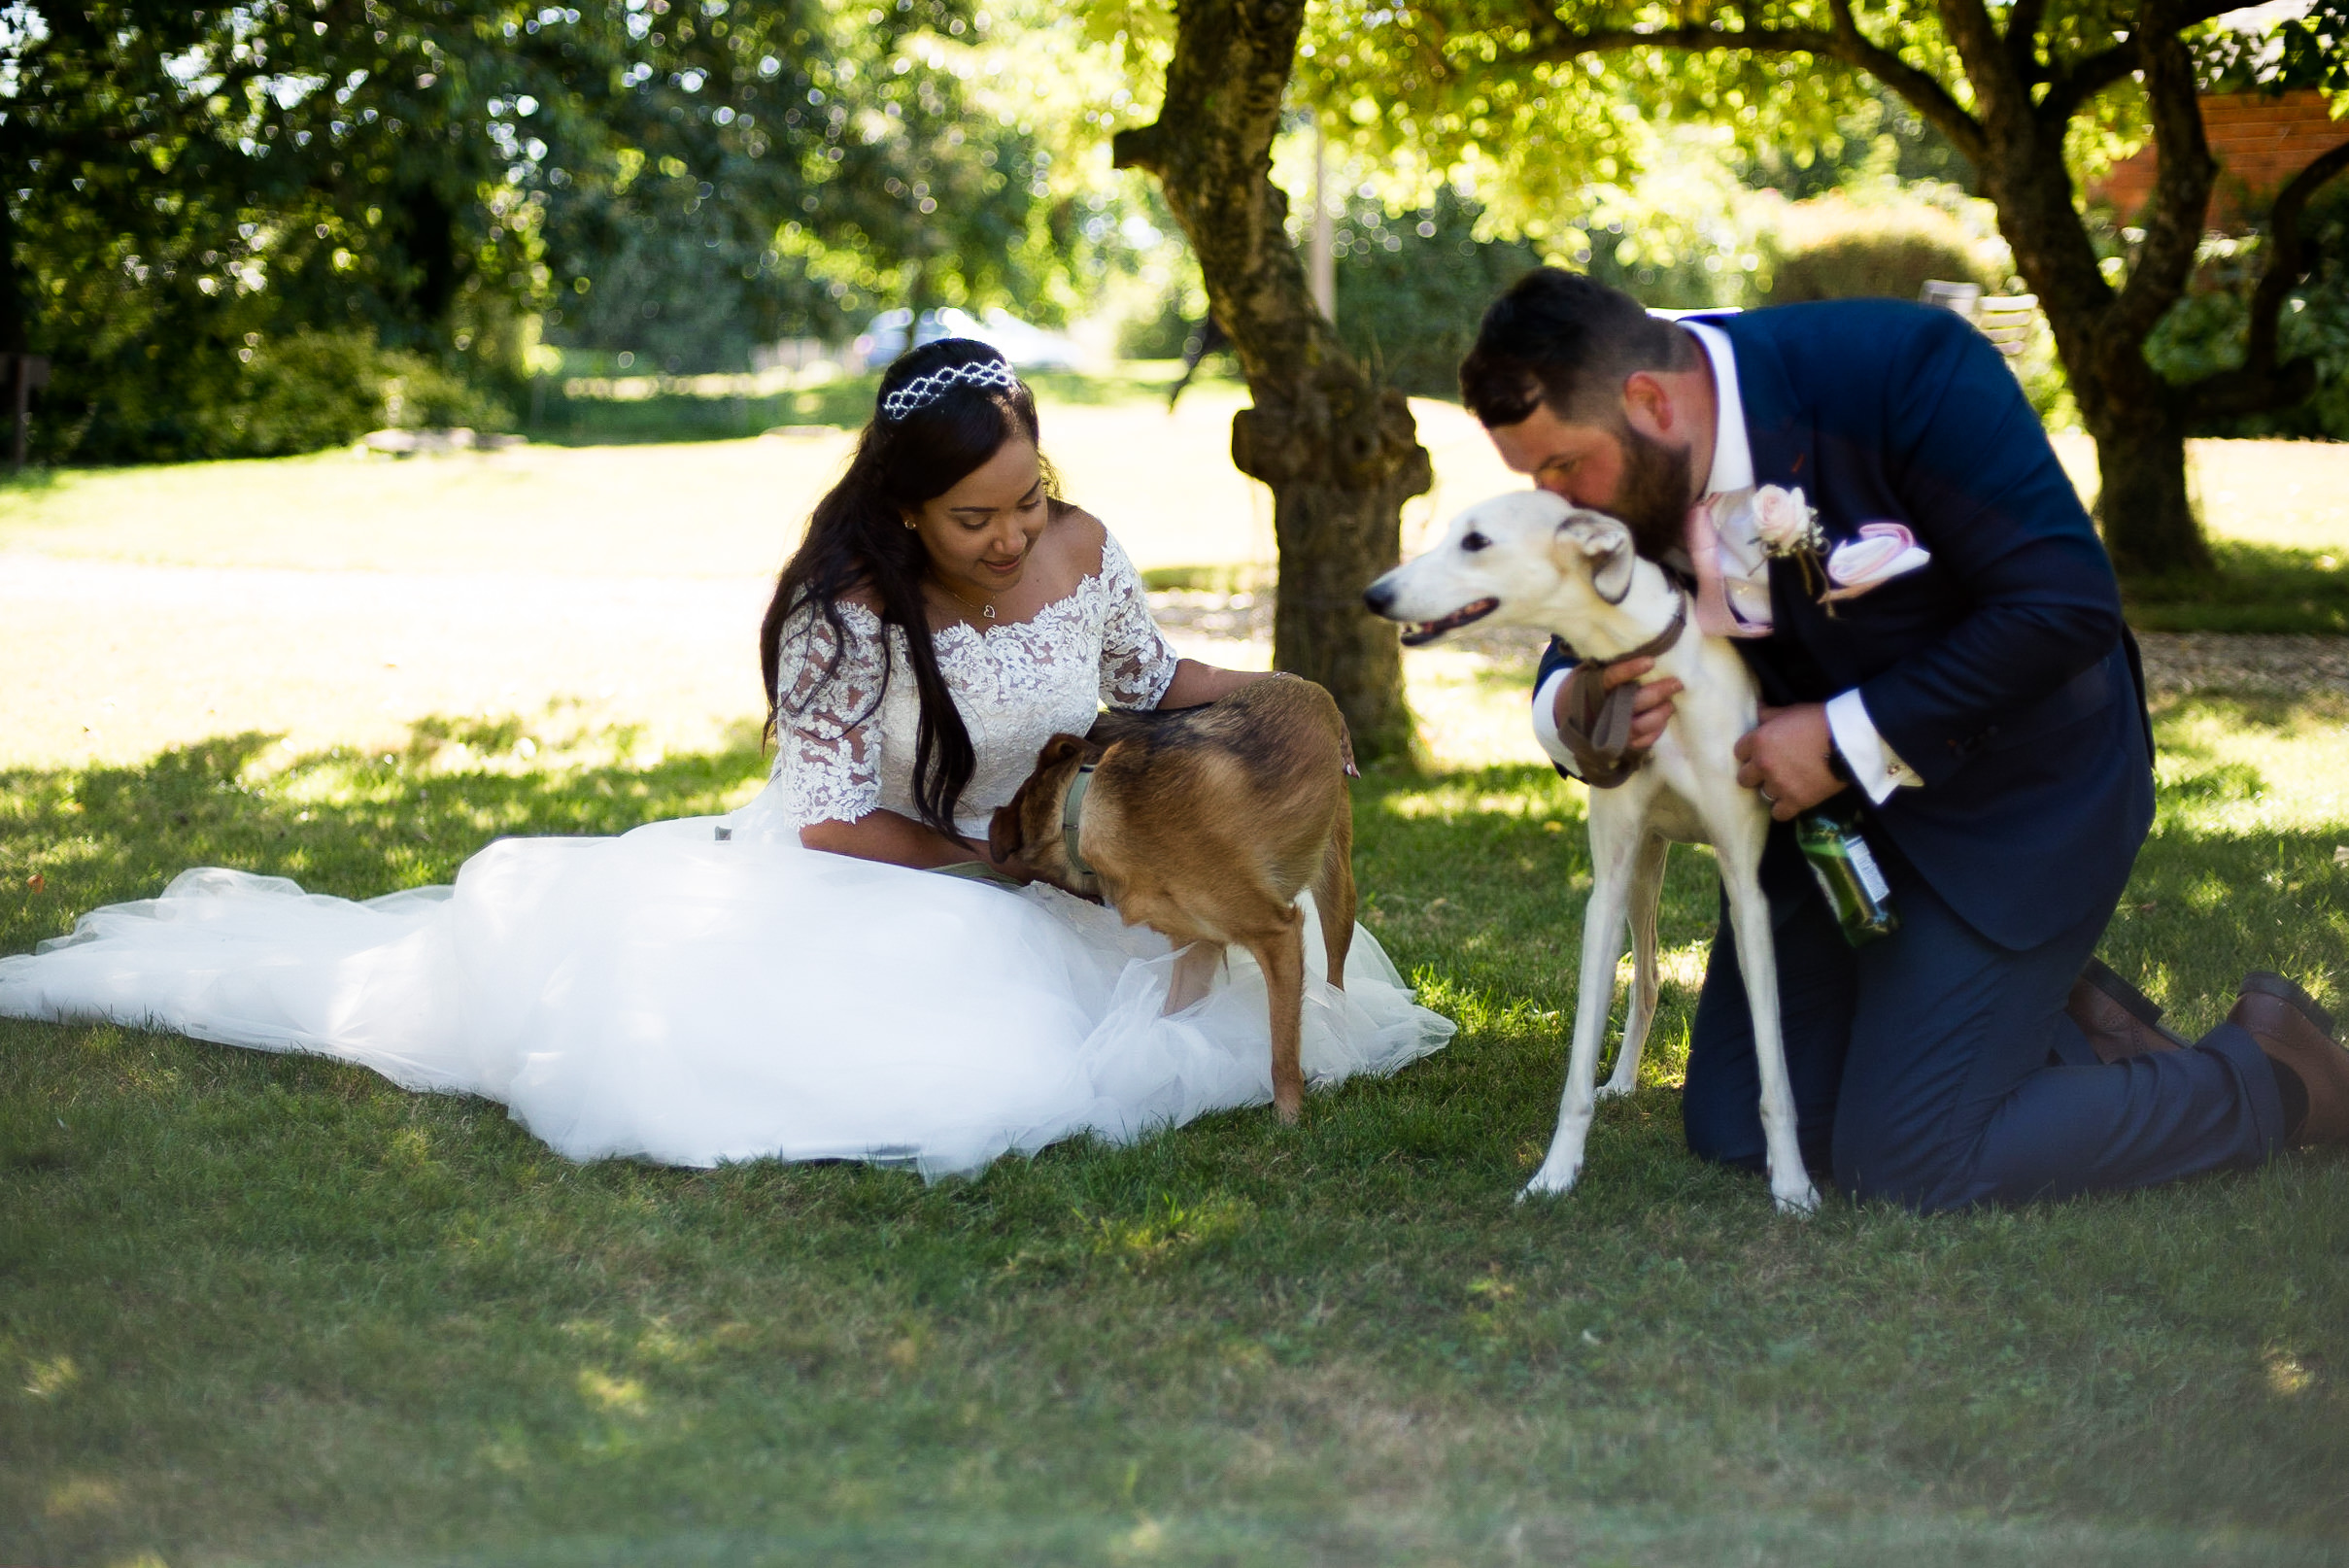 Bride and Groom with their dogs